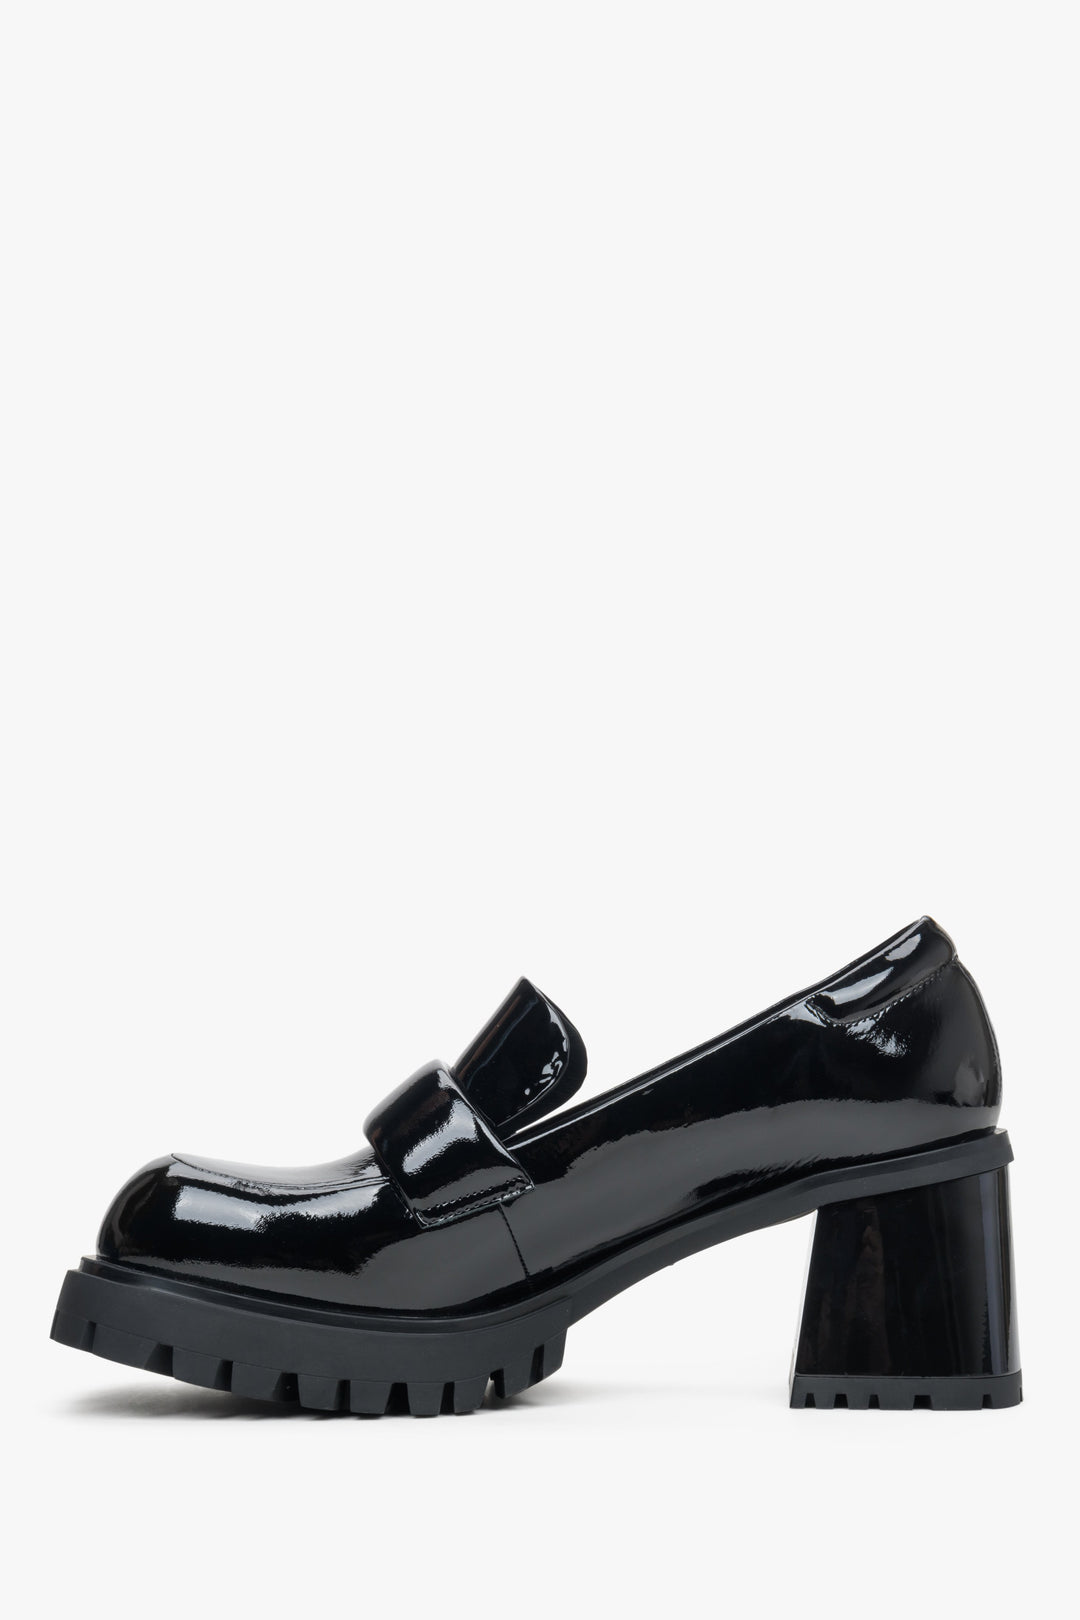 Women's black loafers with a heel made of patent leather by the Estro brand - shoe profile.